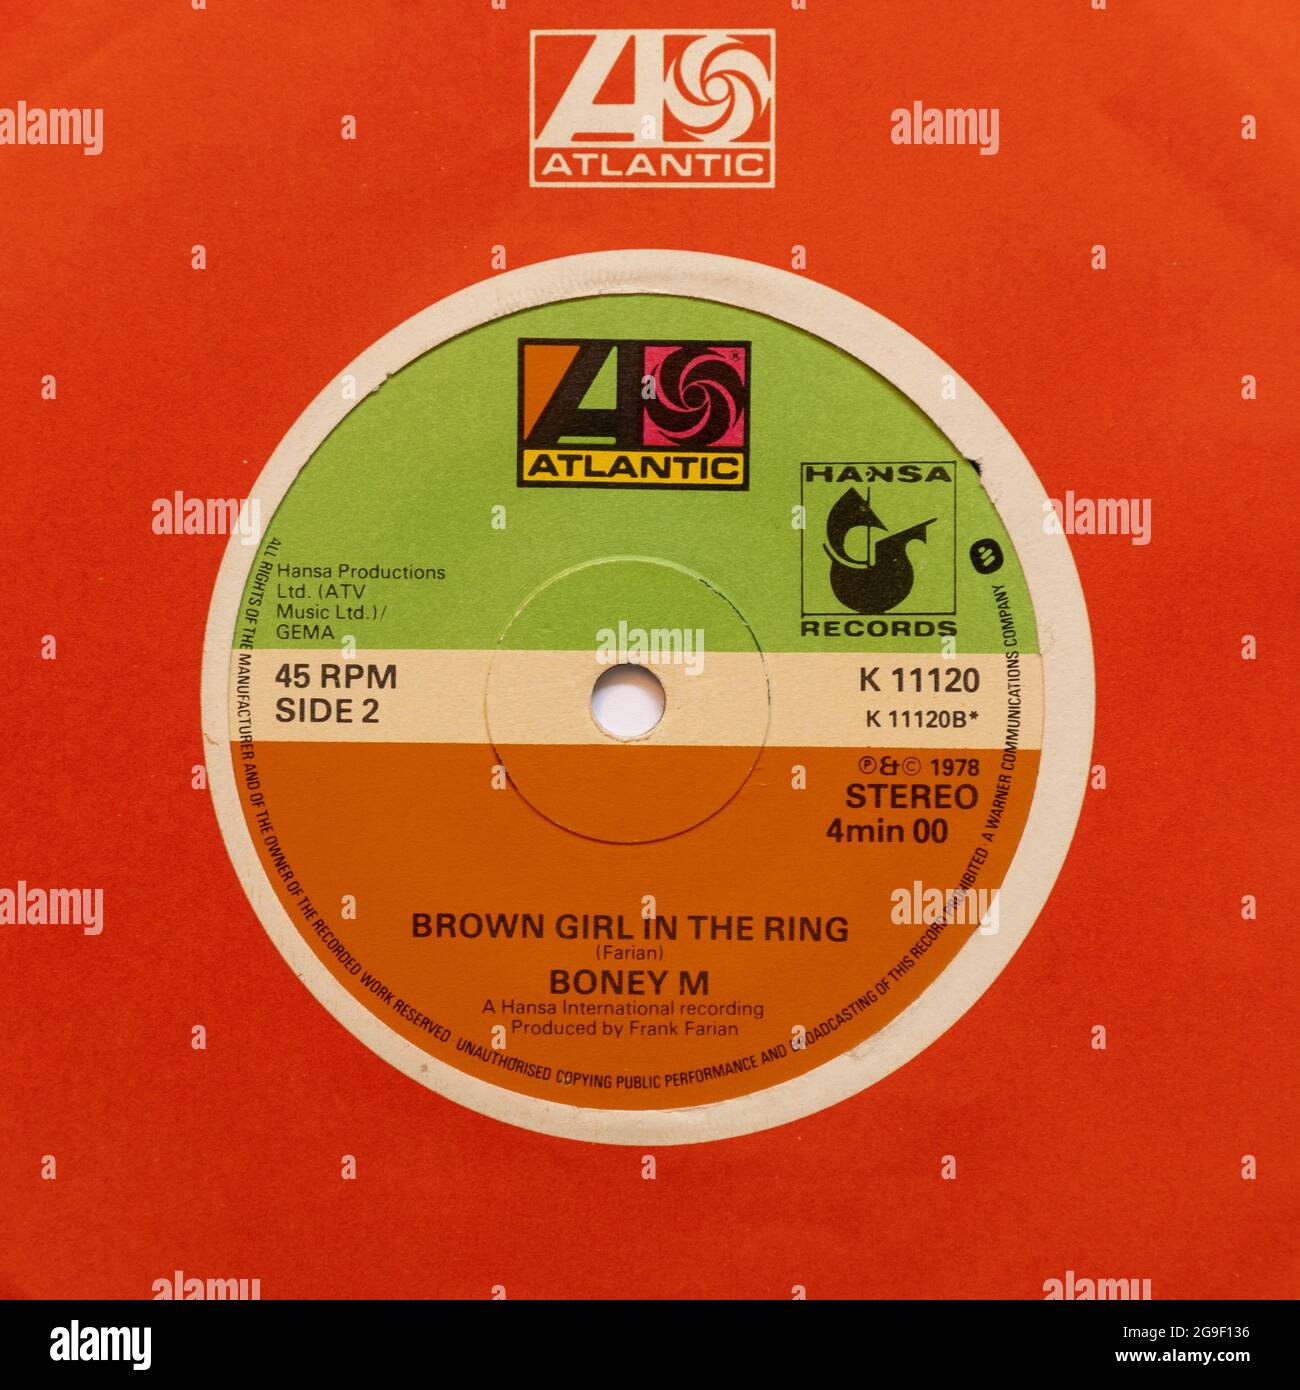 Brown Girl in the Ring by Boney M, a stock photo of the 7' single vinyl 45 rpm record in cover Stock Photo